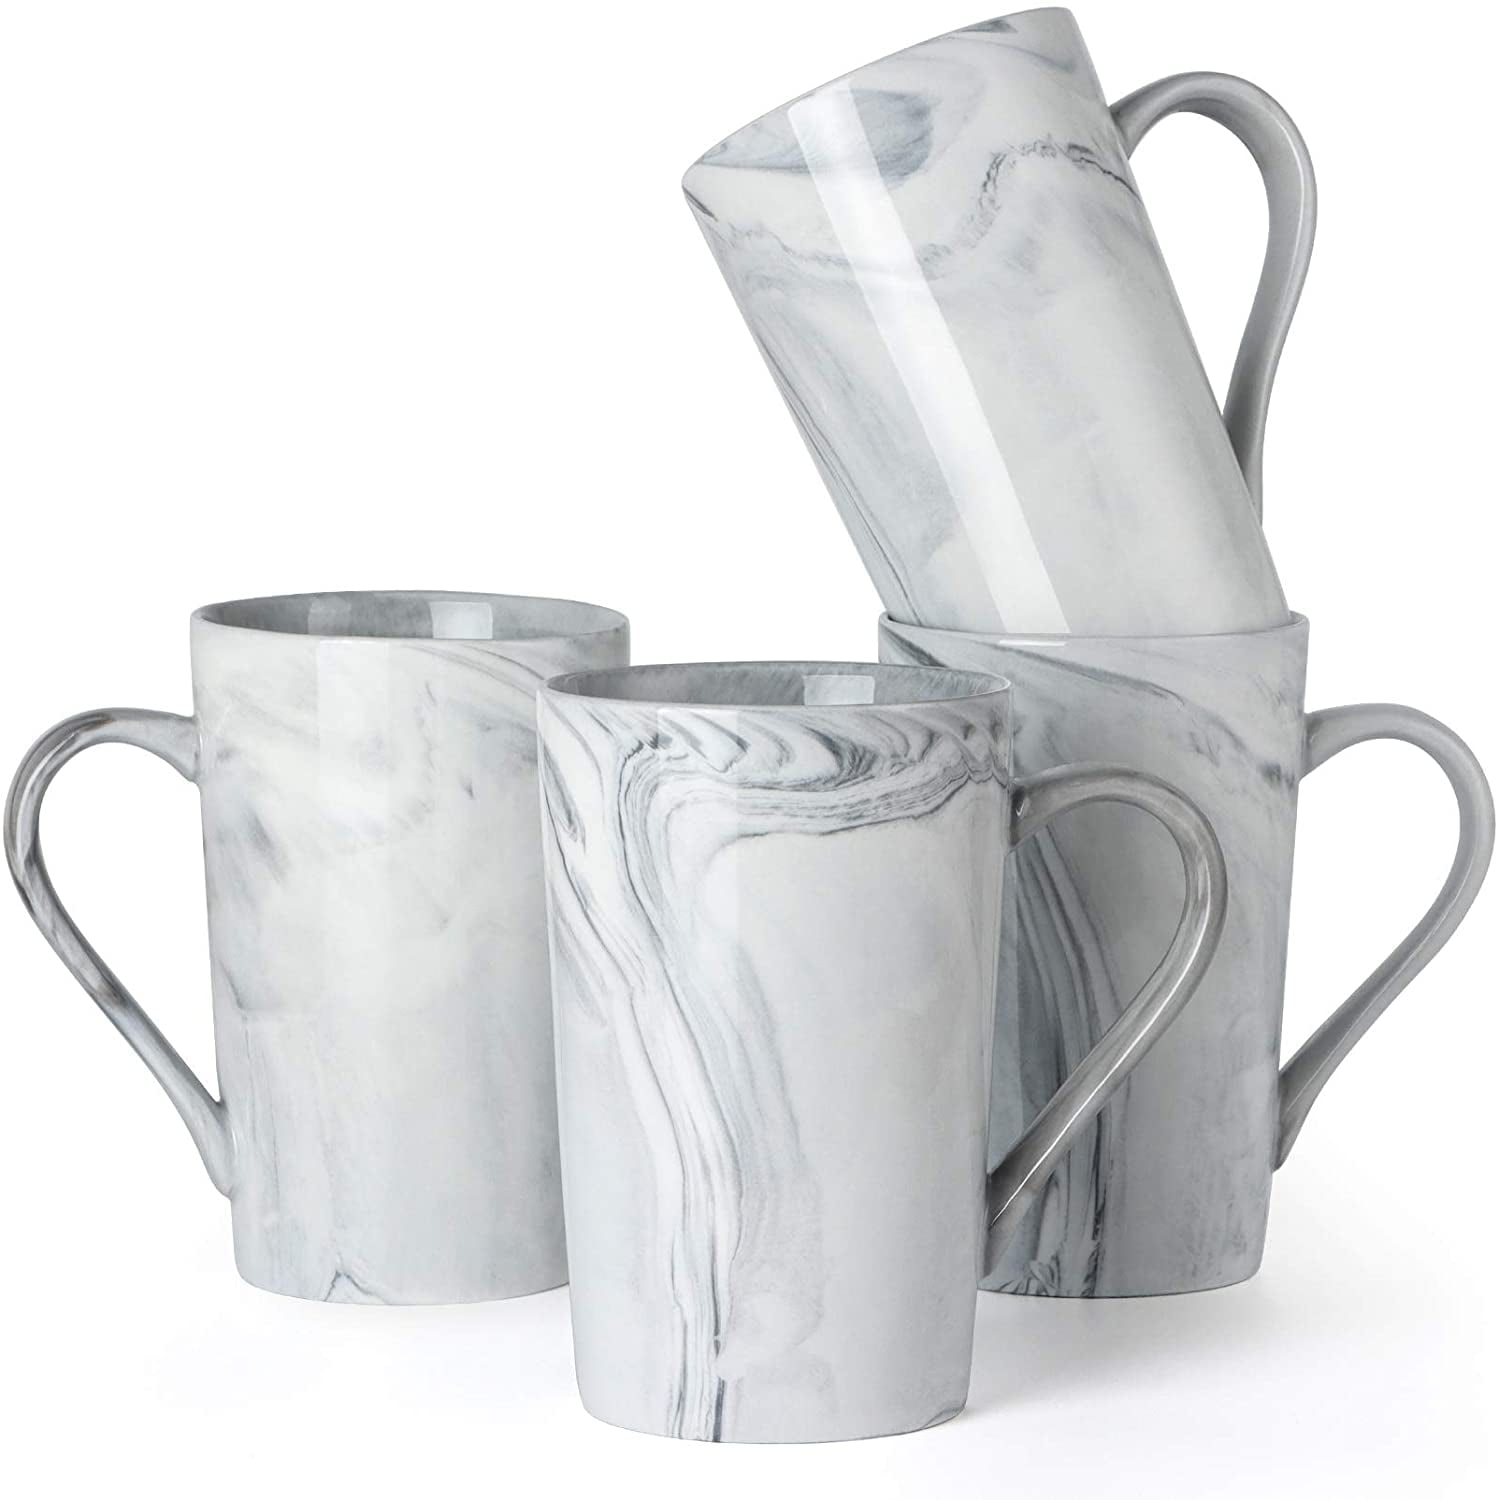 12 oz Coffee Mugs, Smilatte M099 Novelty Marble Ceramic Cup for Boy Girl lover, Set of 4, Gray